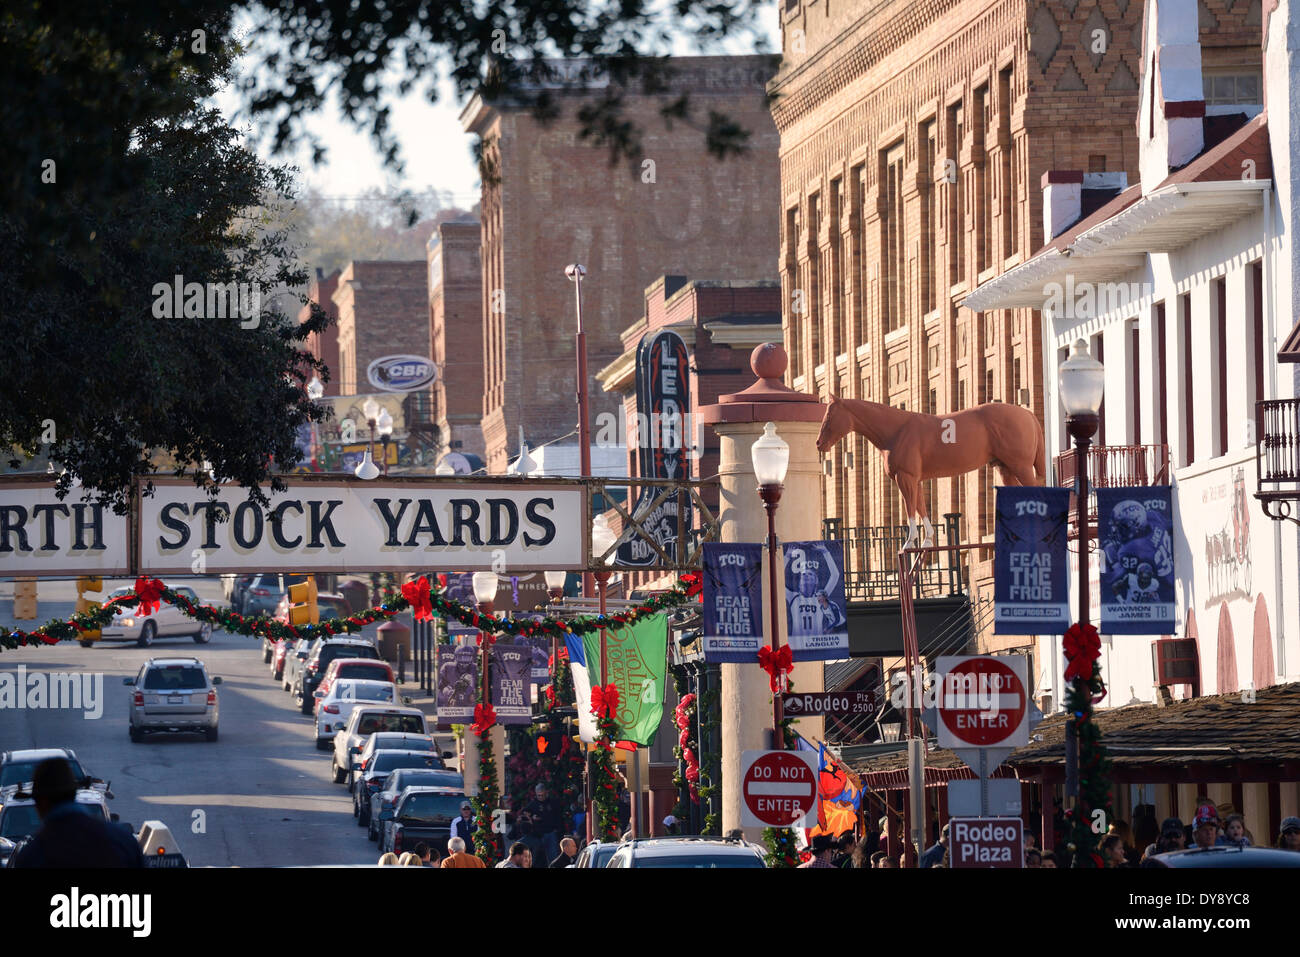 USA, United States, Nord, Amérique, Texas, Fort Worth Stockyards, bâtiment, Banque D'Images